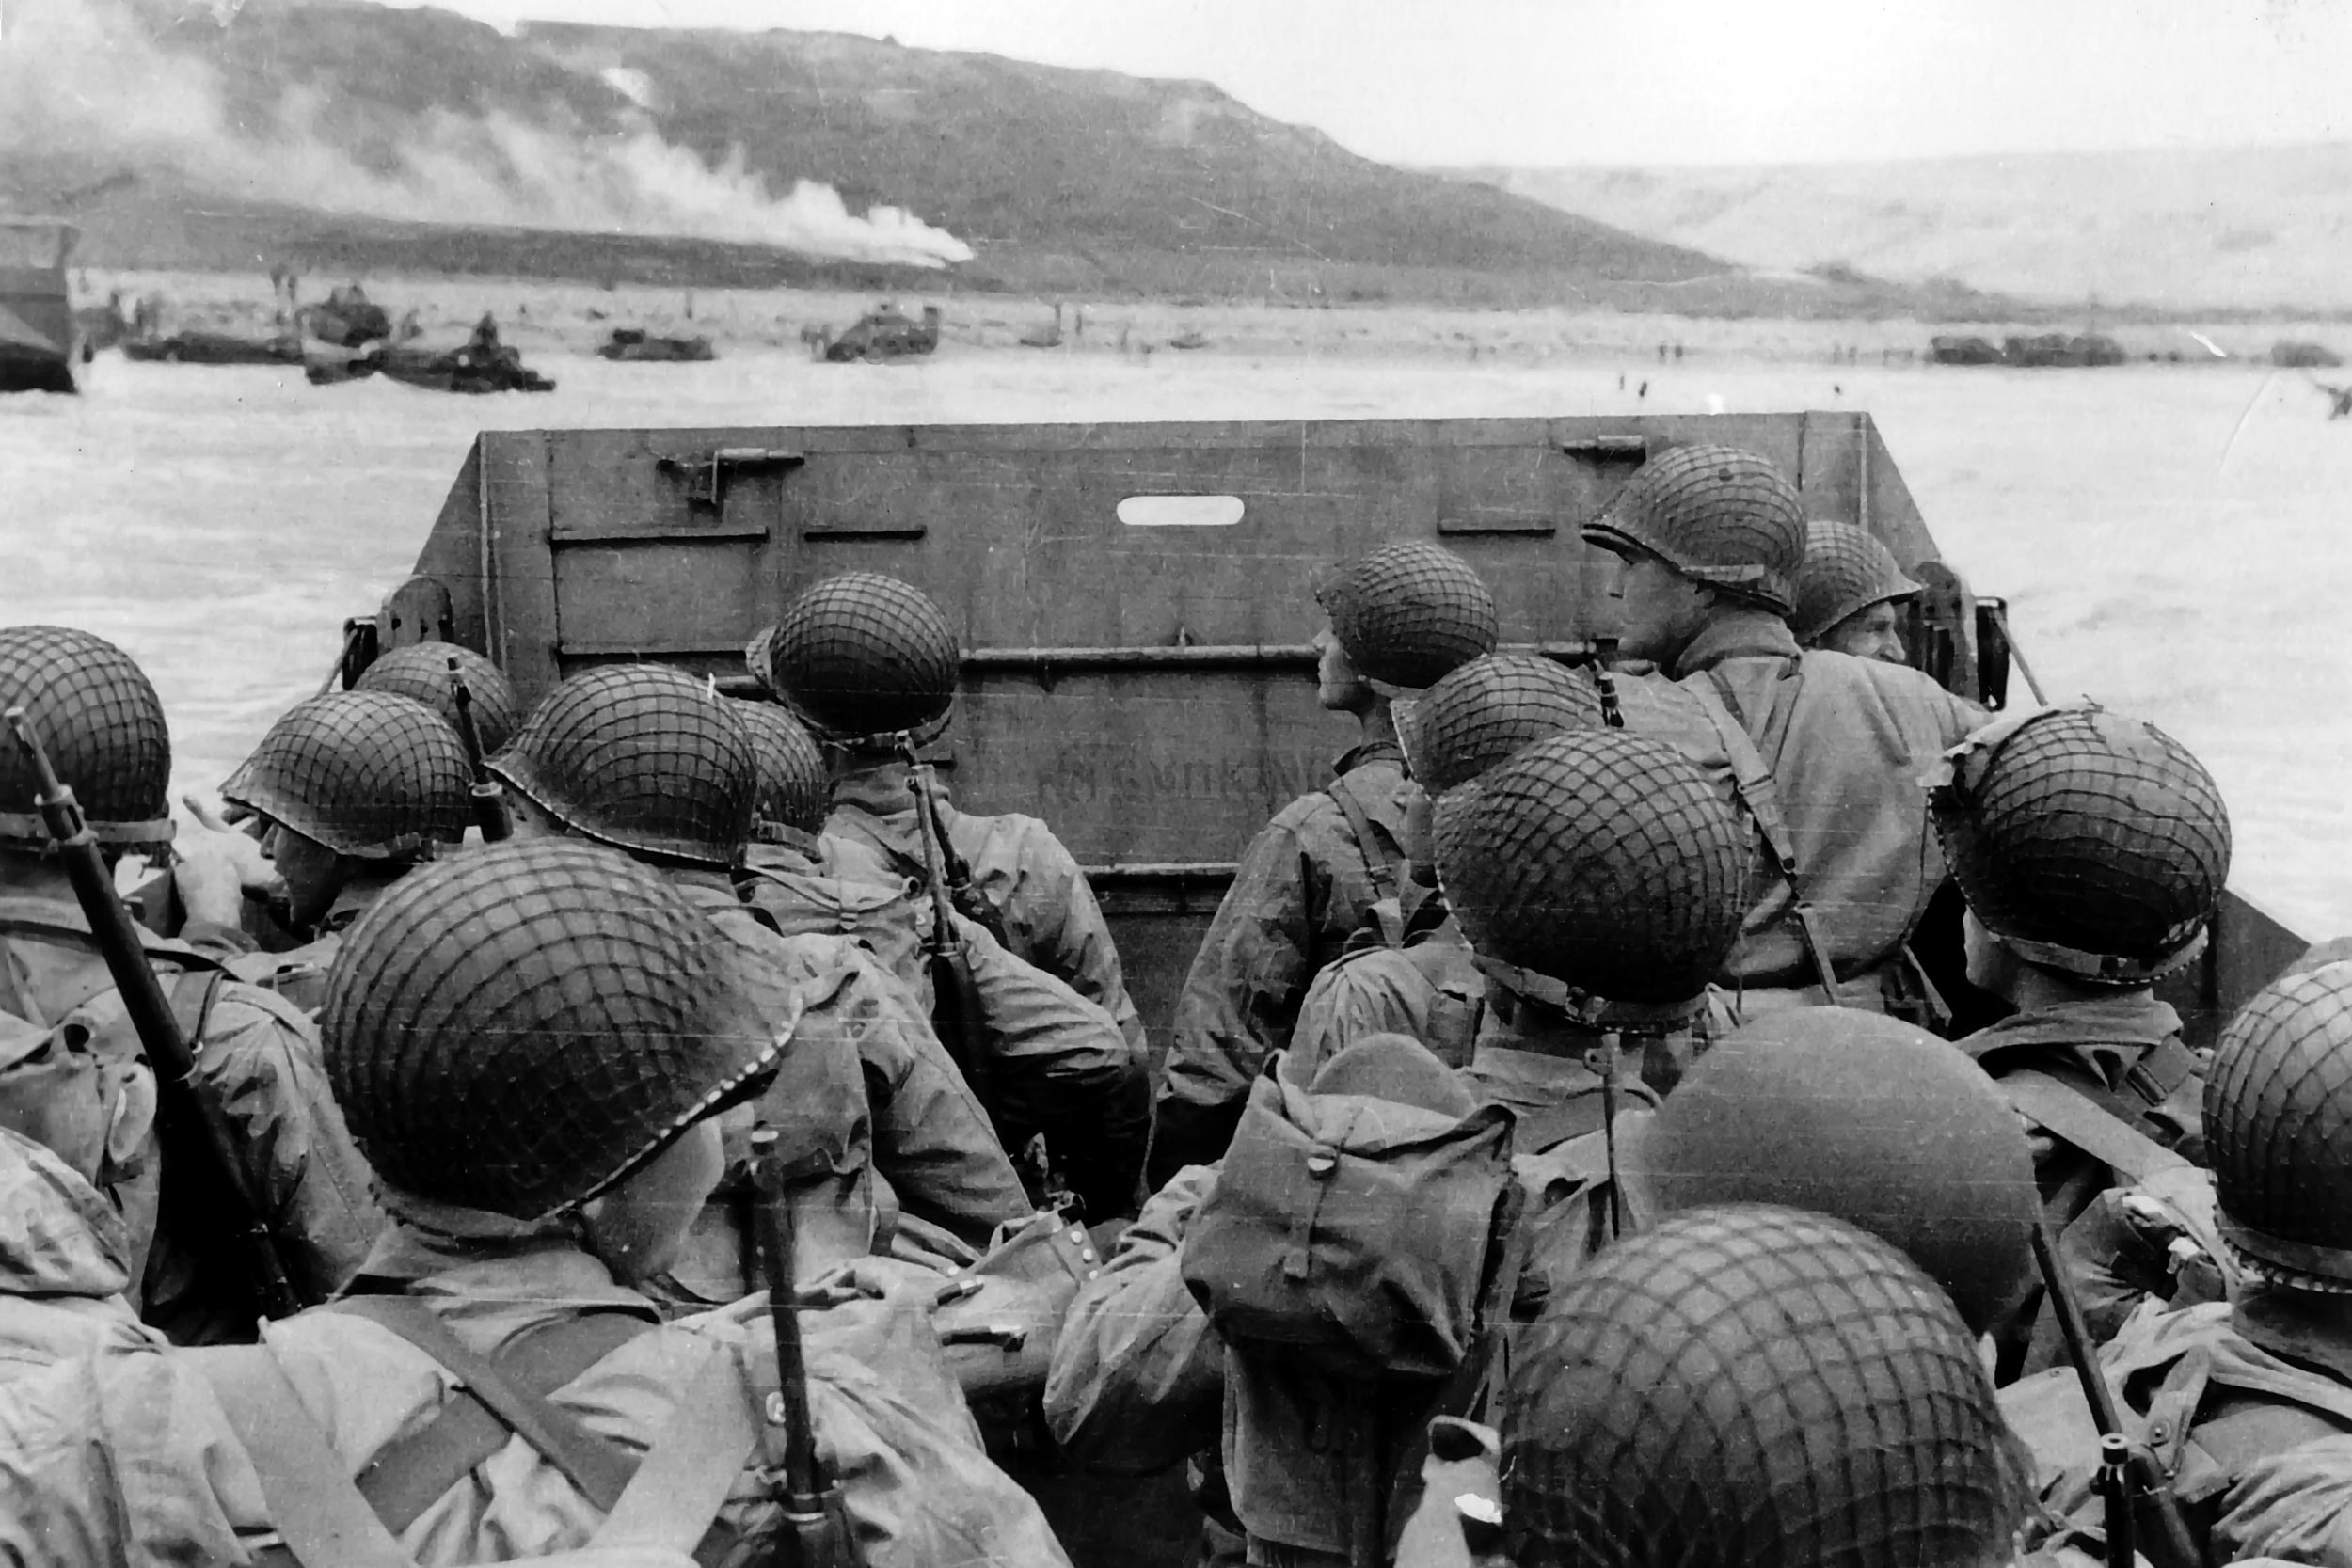 Troops in an LCVP landing craft approaching "Omaha" Beach on D-Day